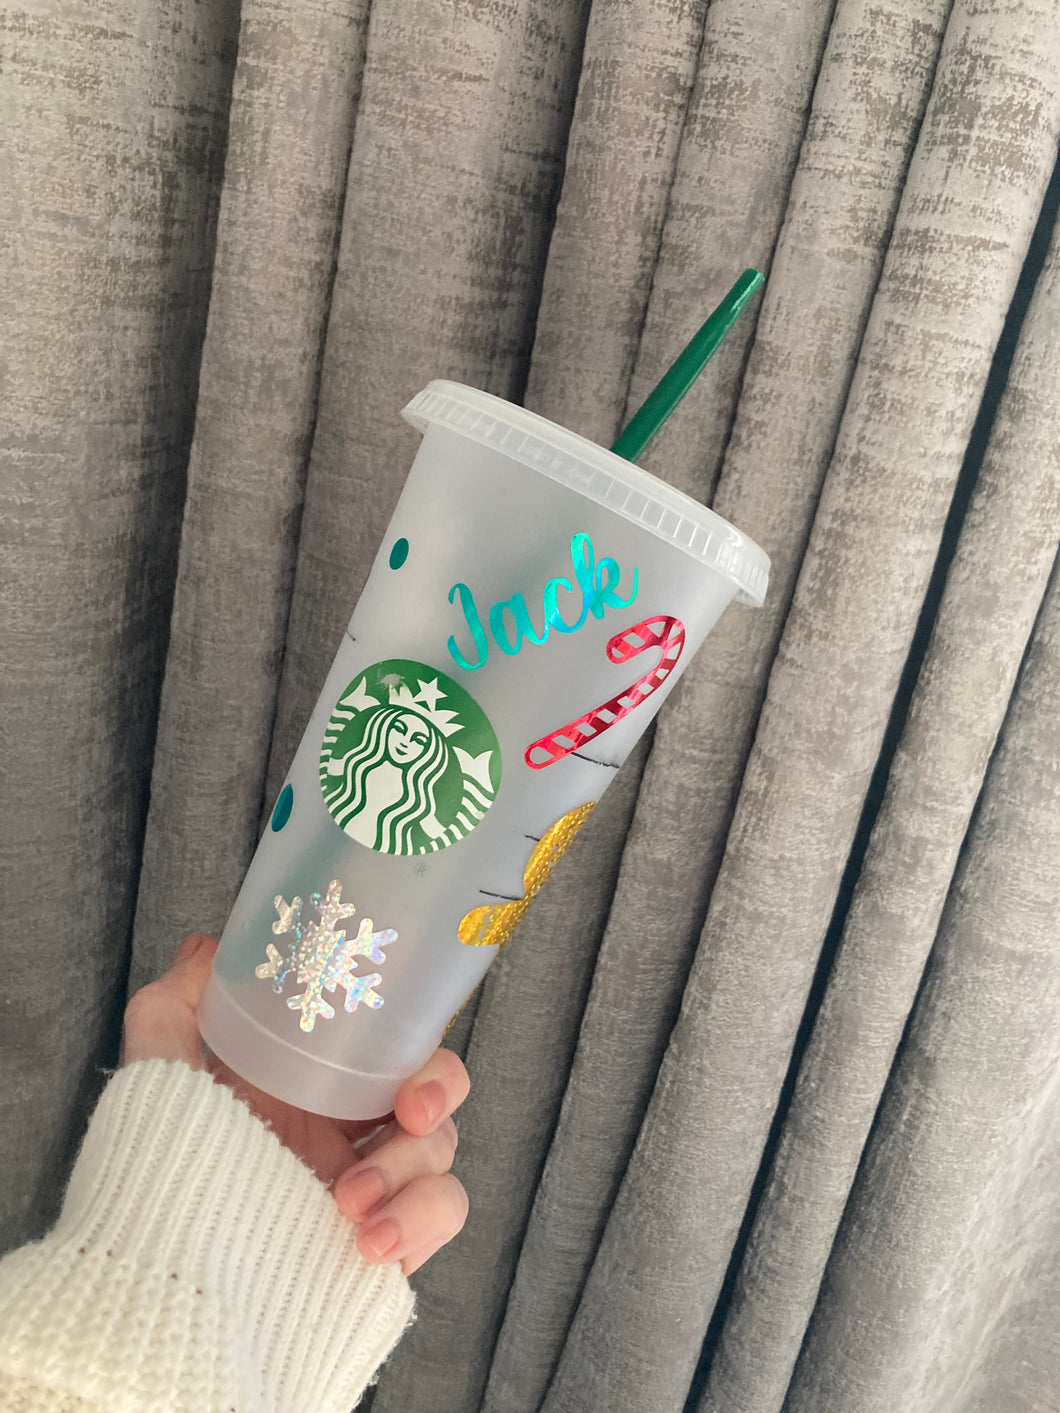 Starbucks cold cup